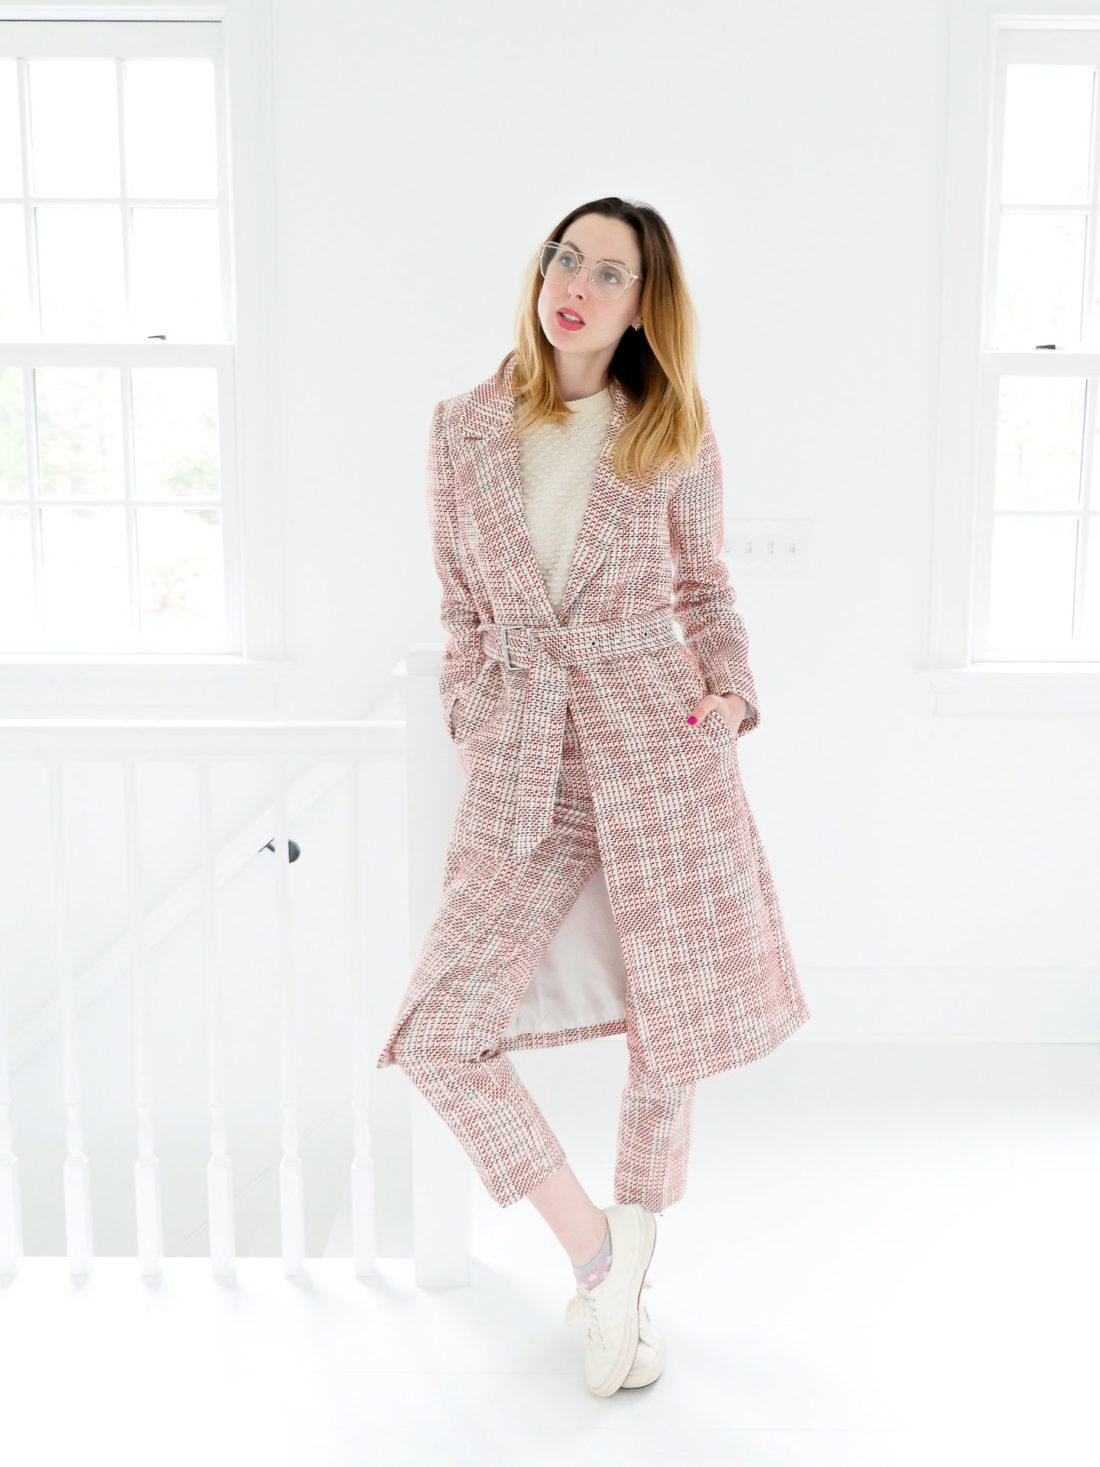 Eva Amurri Martino wears red and white patterned trousers, a matcing coat, and clear glasses in the studio of her Connecticut home